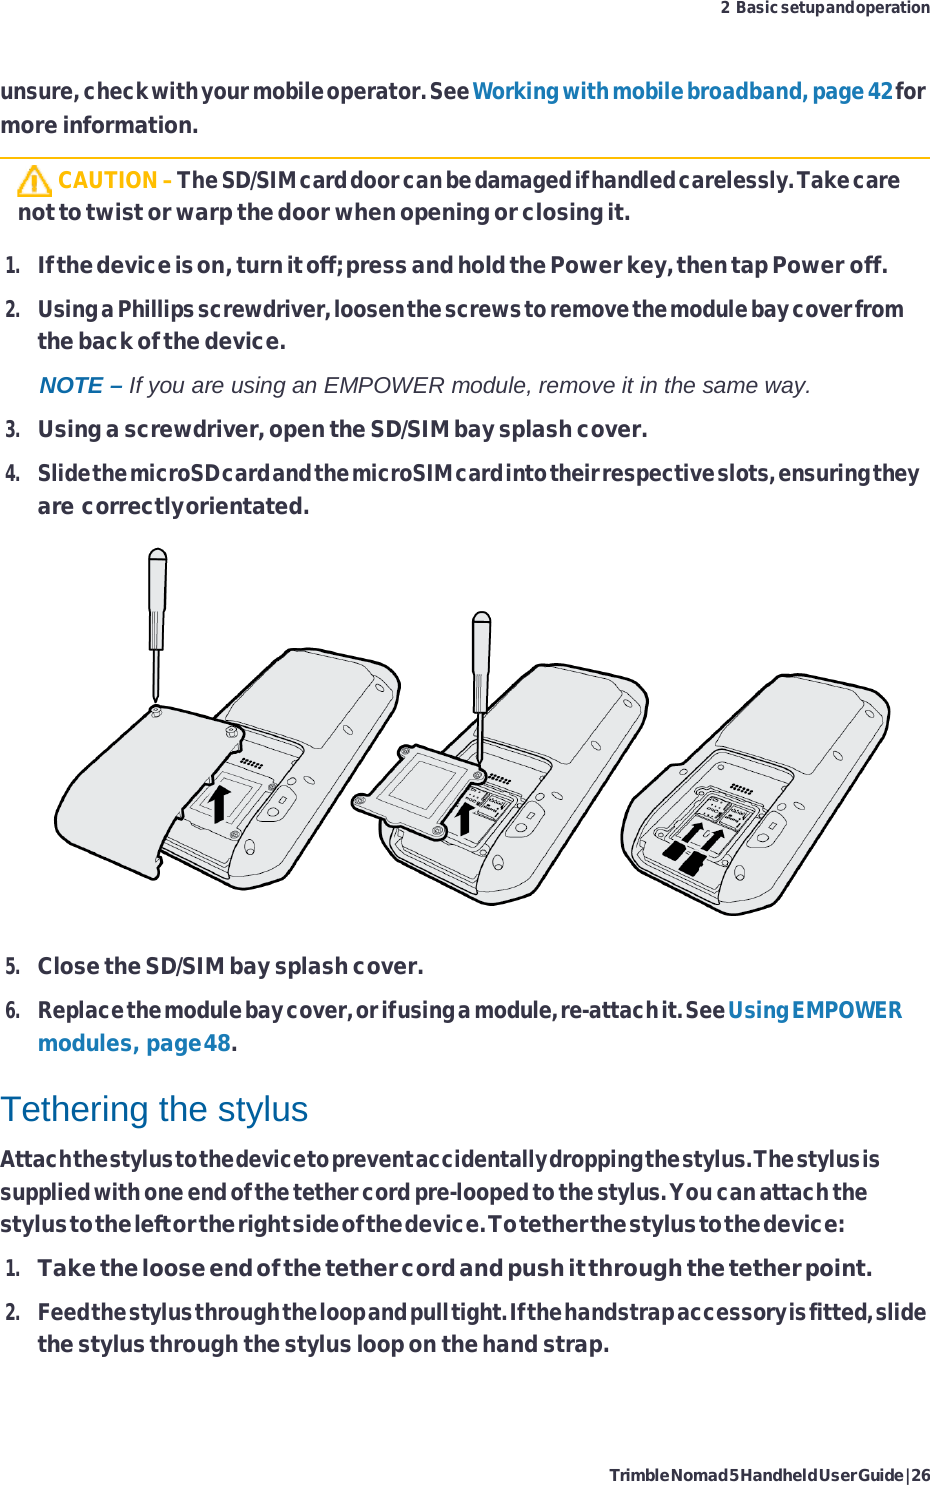 Trimble Nomad 5 Handheld User Guide | 26 2 Basic setup and operation    unsure, check with your mobile operator. See Working with mobile broadband, page 42 for more information.   CAUTION – The SD/SIM card door can be damaged if handled carelessly. Take care not to twist or warp the door when opening or closing it.  1. If the device is on, turn it off; press and hold the Power key, then tap Power off. 2. Using a Phillips screwdriver, loosen the screws to remove the module bay cover from the back of the device. NOTE – If you are using an EMPOWER module, remove it in the same way. 3. Using a screwdriver, open the SD/SIM bay splash cover. 4. Slide the microSD card and the microSIM card into their respective slots, ensuring they are correctly orientated.   5. Close the SD/SIM bay splash cover. 6. Replace the module bay cover, or if using a module, re-attach it. See Using EMPOWER modules, page 48.  Tethering the stylus Attach the stylus to the device to prevent accidentally dropping the stylus. The stylus is supplied with one end of the tether cord pre-looped to the stylus. You can attach the stylus to the left or the right side of the device. To tether the stylus to the device: 1. Take the loose end of the tether cord and push it through the tether point. 2. Feed the stylus through the loop and pull tight. If the handstrap accessory is fitted, slide the stylus through the stylus loop on the hand strap. 